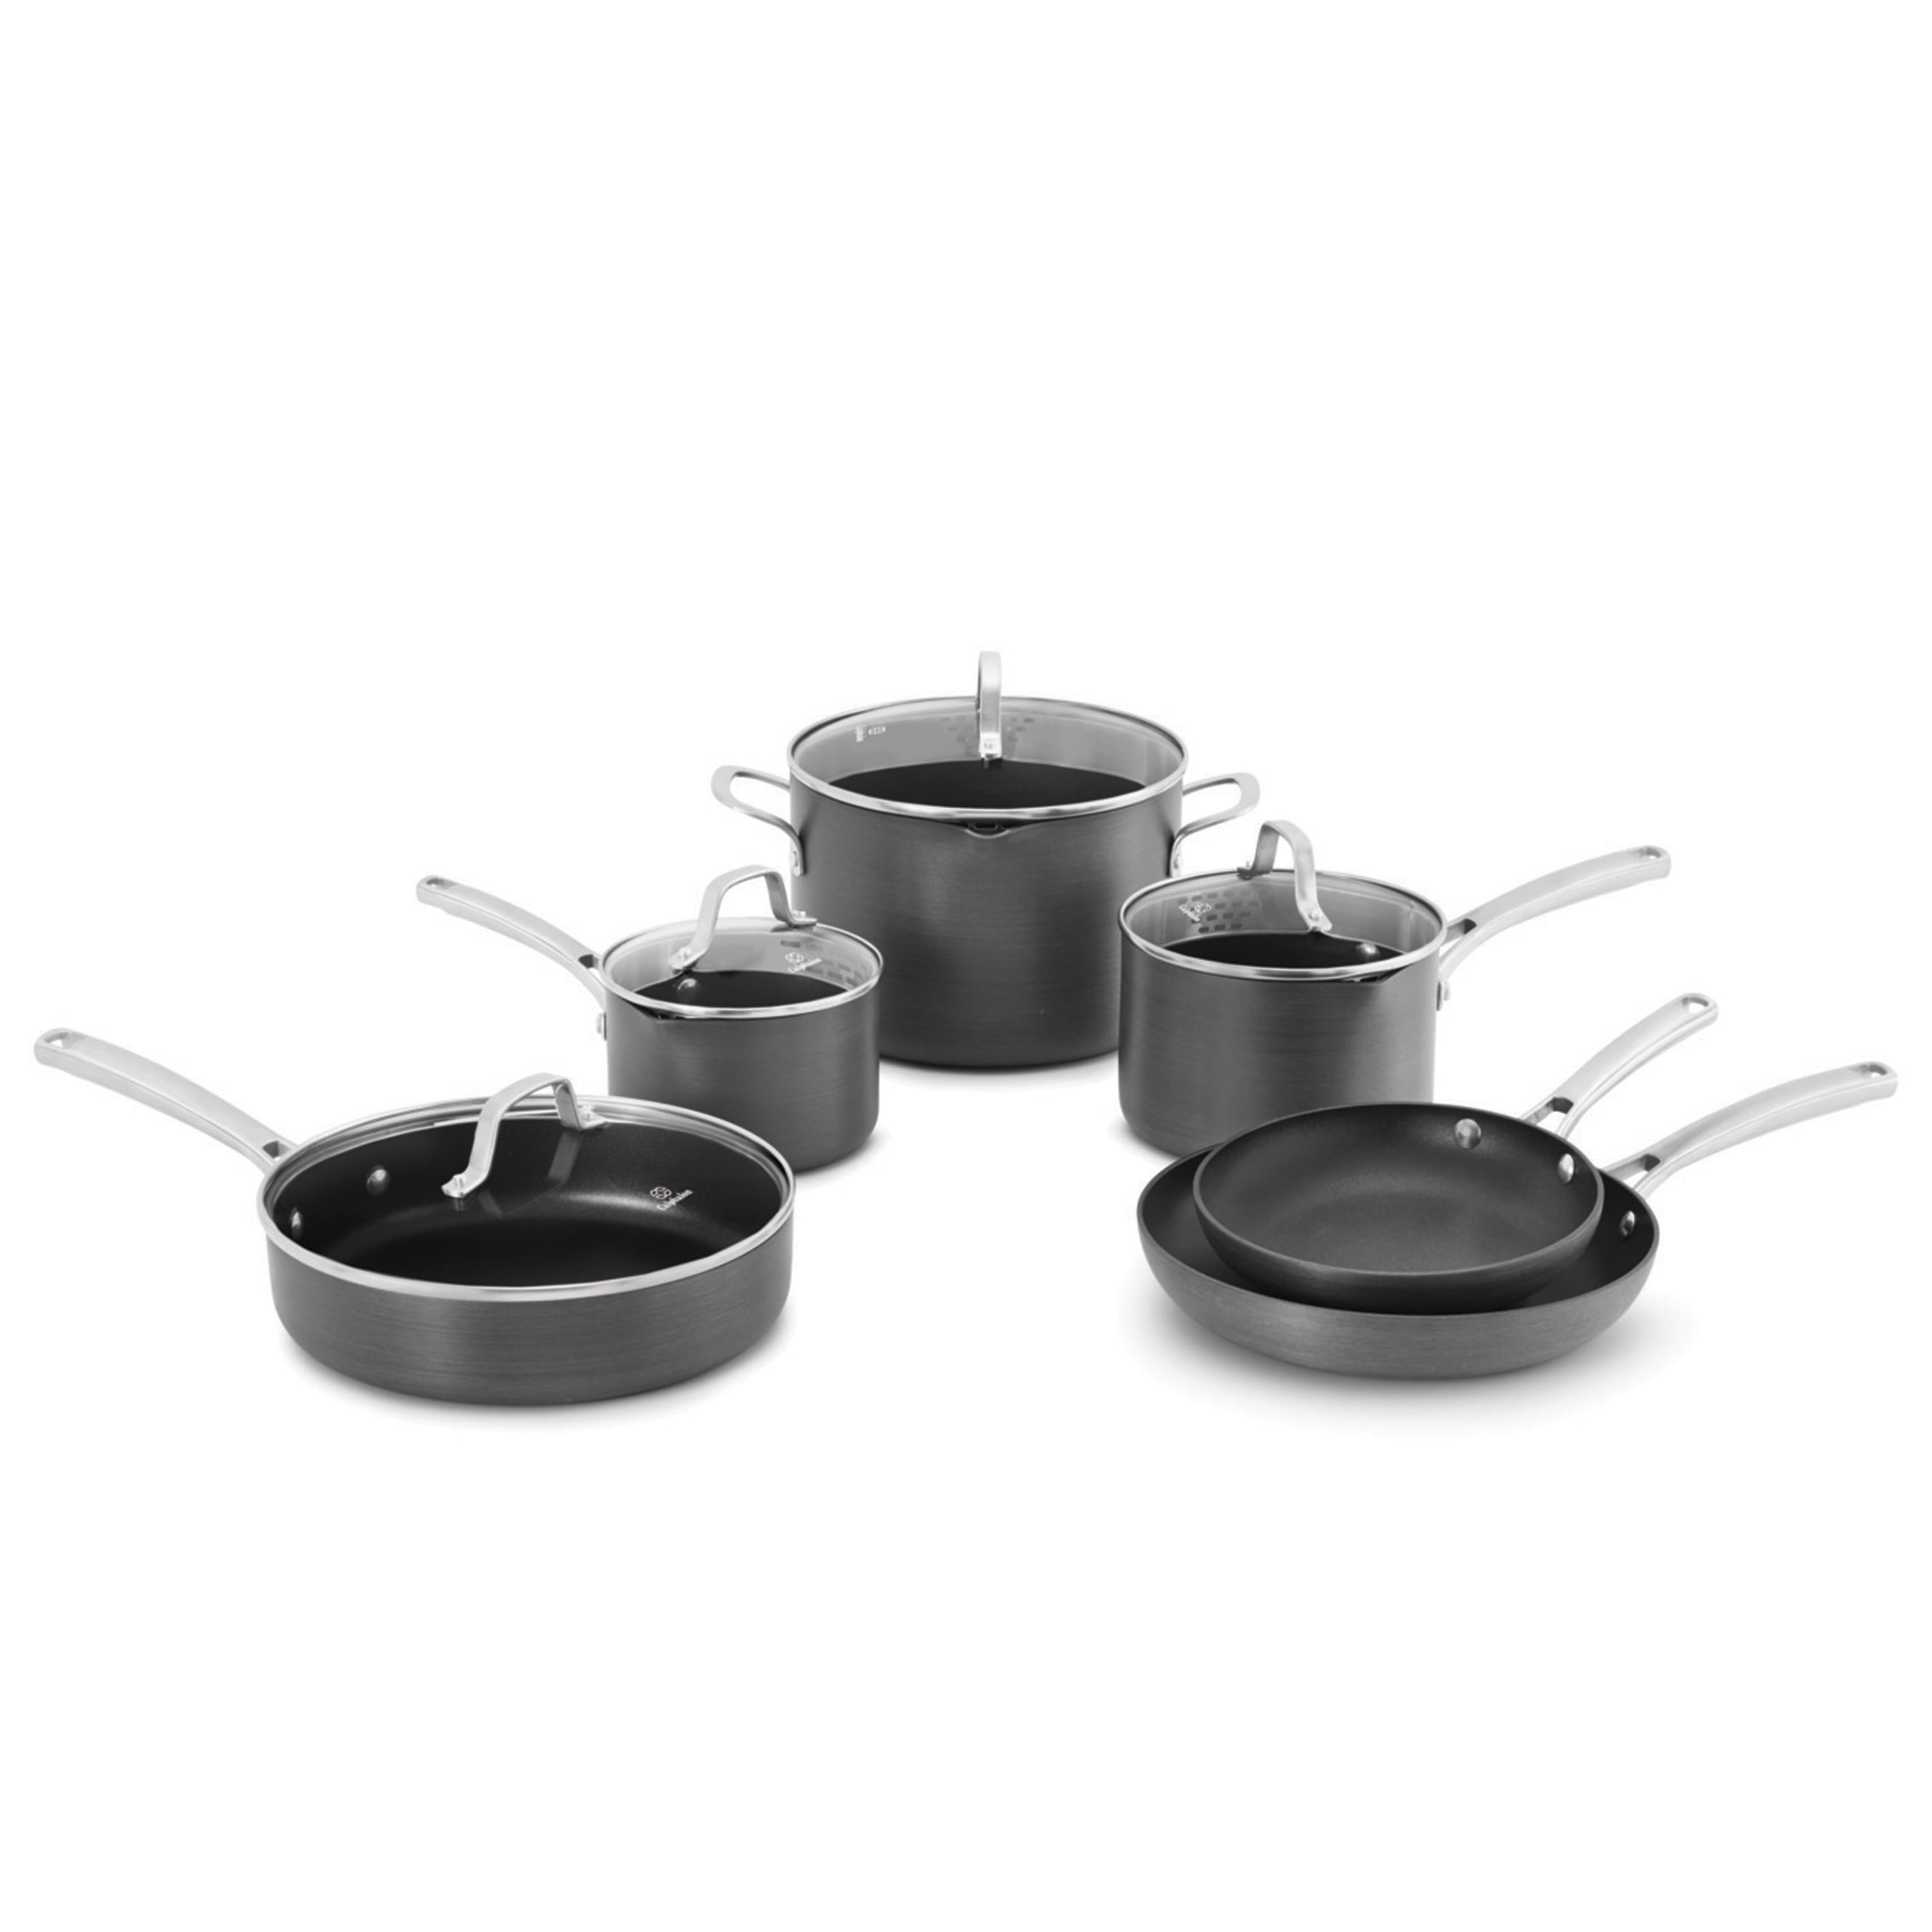 Calphalon 10-Piece Pots and Pans Set, Nonstick Kitchen Cookware with  Stay-Cool Stainless Steel Handles, Dishwasher and Metal Utensil Safe,  PFOA-Free